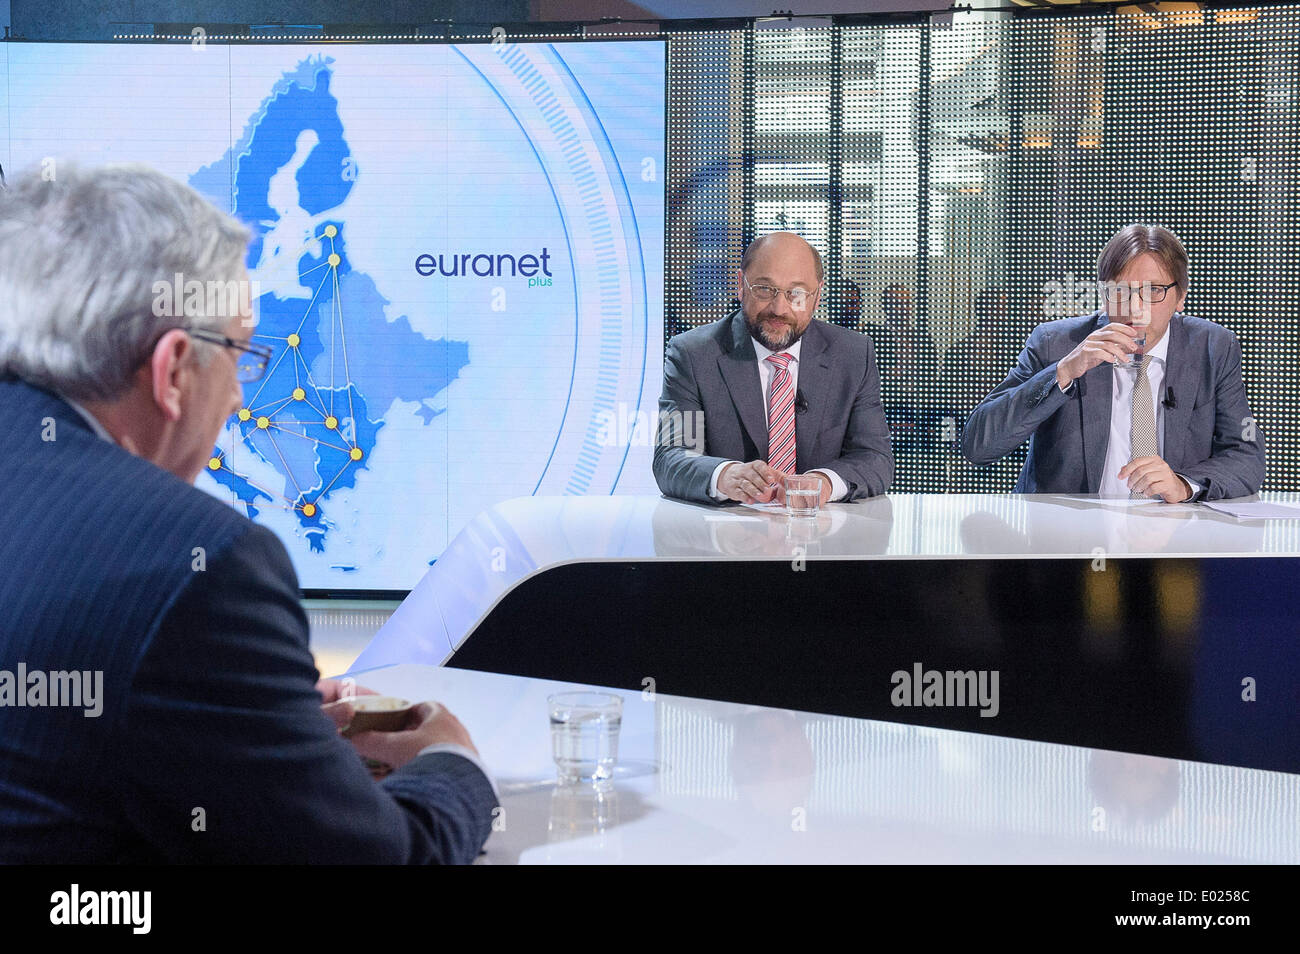 Brussels, Bxl, Belgium. 29th Apr, 2014. Guy Verhofstadt (R ), top candidate of Liberals (ALDE) and Martin Schulz (C ), top candidate of the Party of European Socialists (PSE) and Jean-Claude Juncker, top candidate for European People's Party (EPP) (L) during Euranet's 'Big Crunch' Presidential debate at the EU parliament in Brussels, Belgium on 29.04.2014 The four top candidates for the presidency of the European Commission - Jean-Claude Juncker, Ska Keller, Martin Schulz and Guy Verhofstadt - attend EU-wide debate organized by EuranetPlus and focused on the major election topics. by Wikt Stock Photo